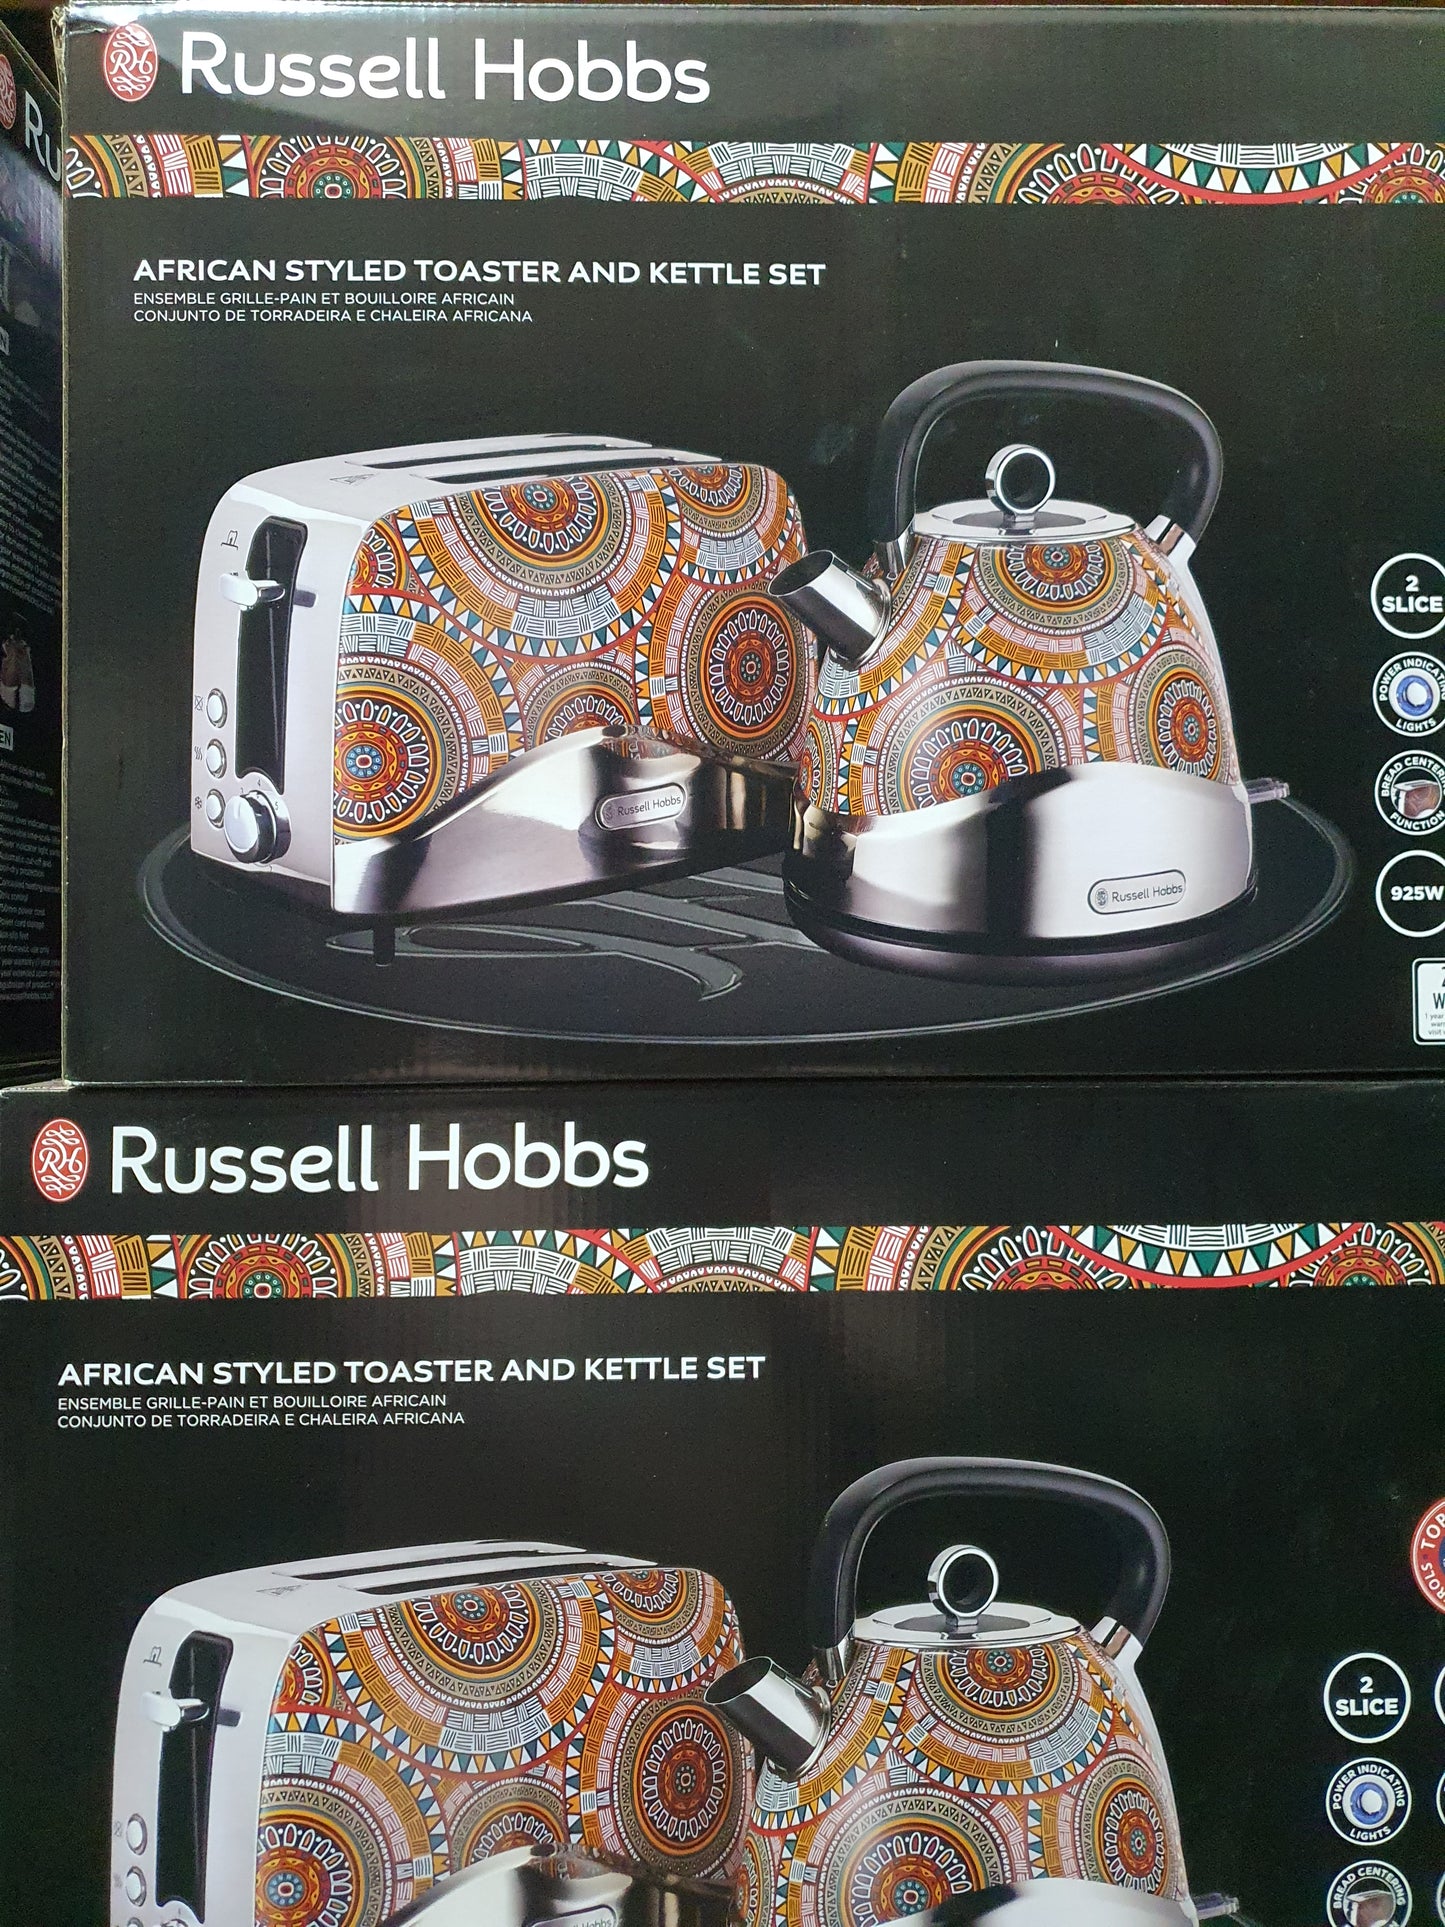 Limited edition russel and hobbs set